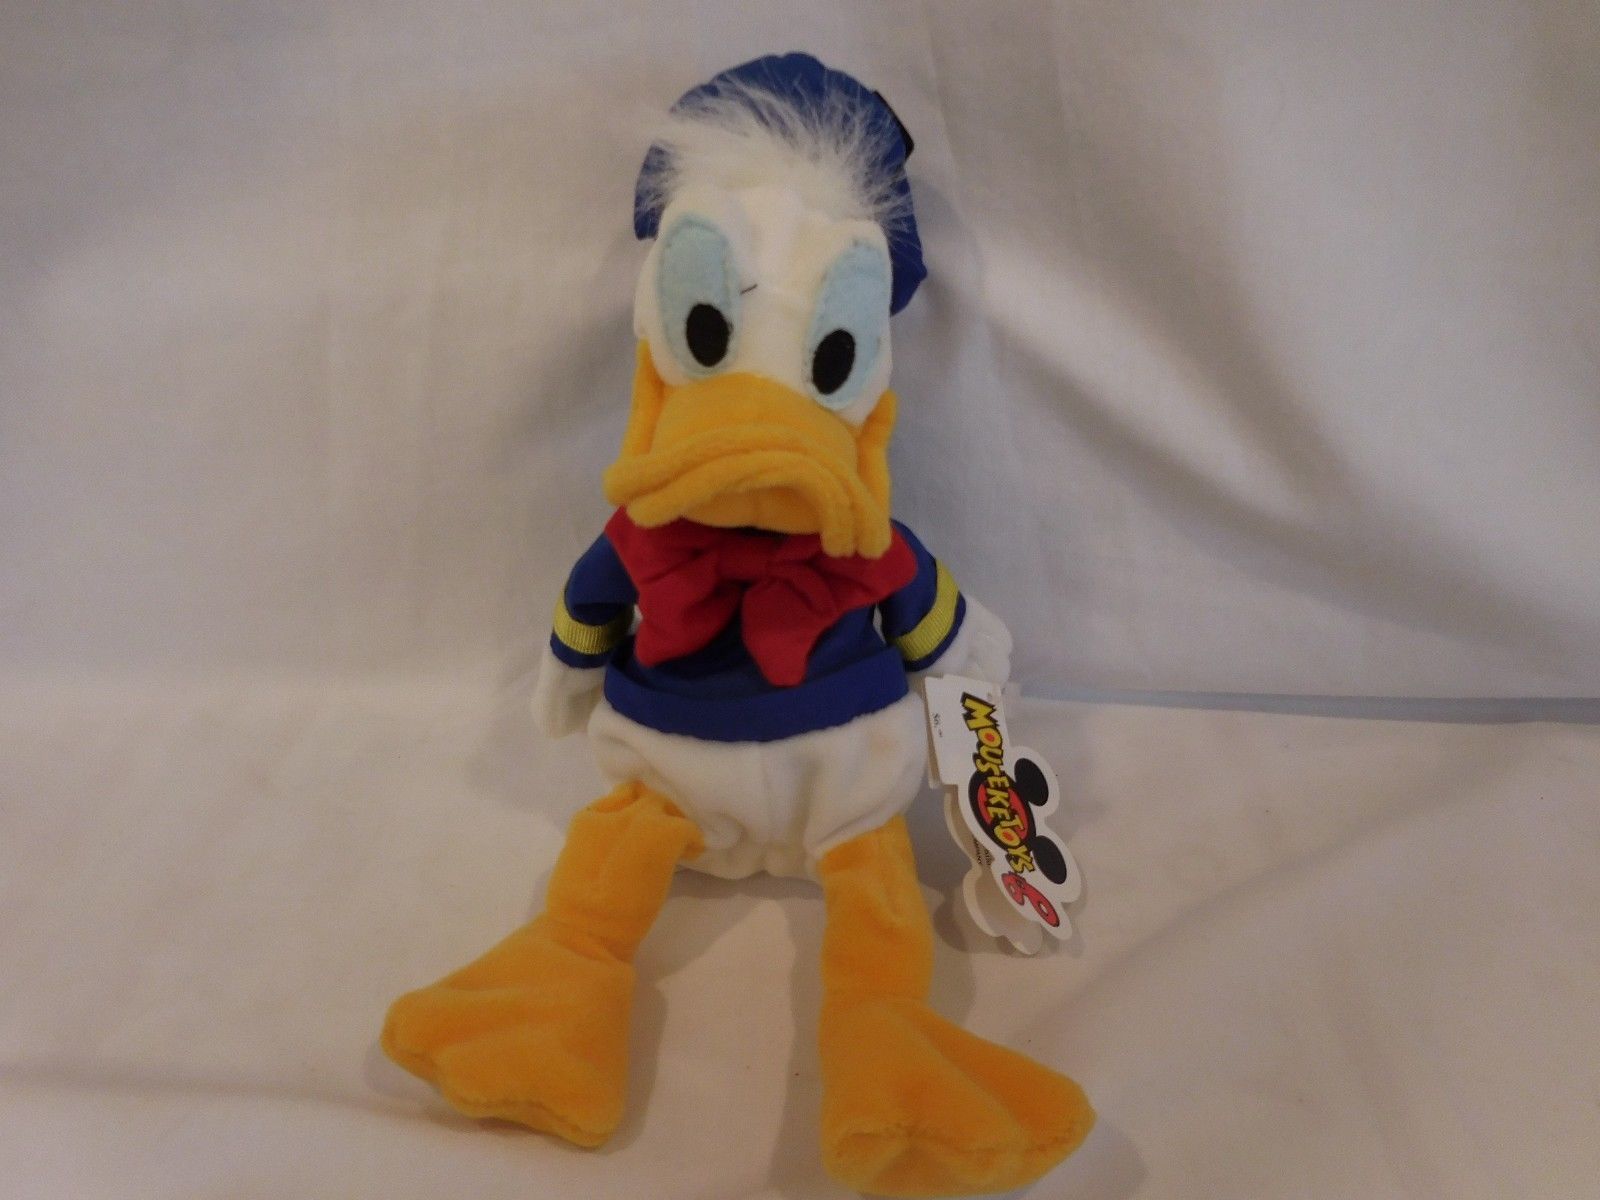 Disney DONALD DUCK PLUSH BEANIE BRAND NEW WITH MOUSEKETOYS TAGS - $9.44